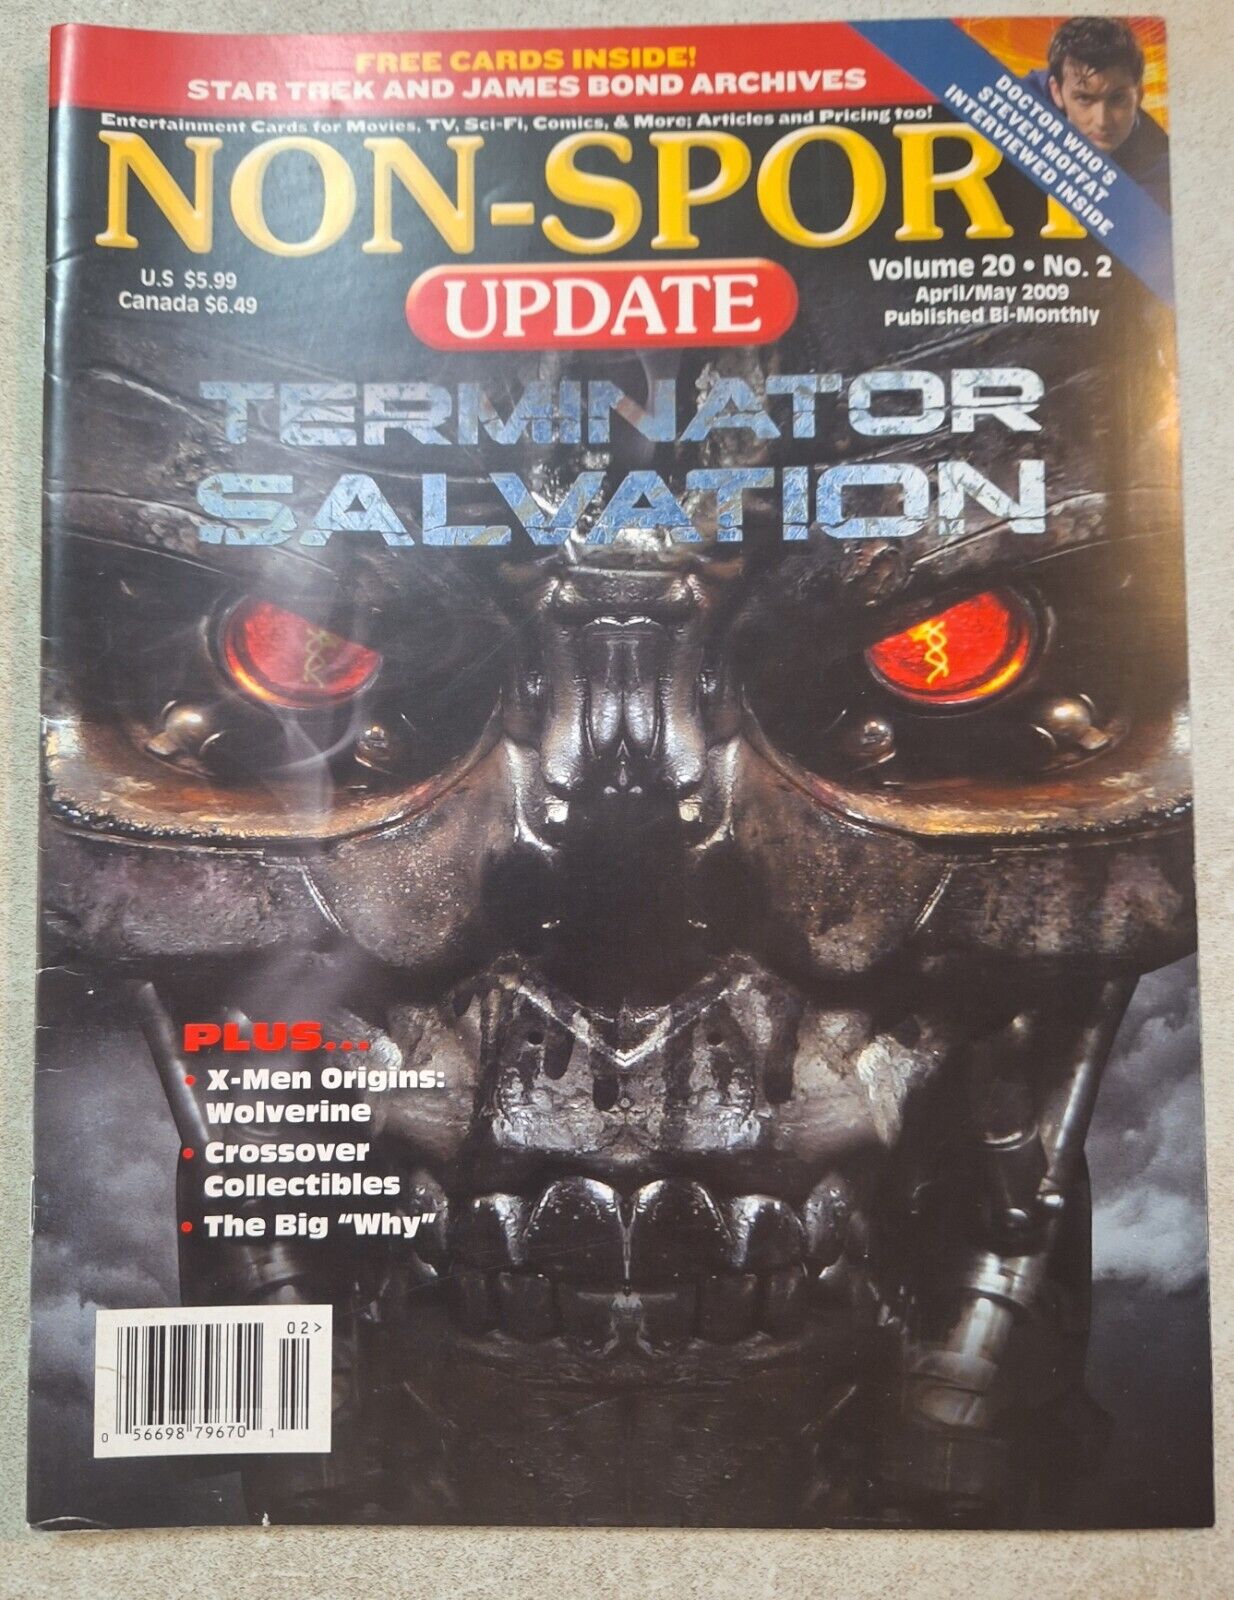 NON SPORT UPDATE Volume 20 No. 2 May 2009 TERMINATOR SALVATION No Cards Included